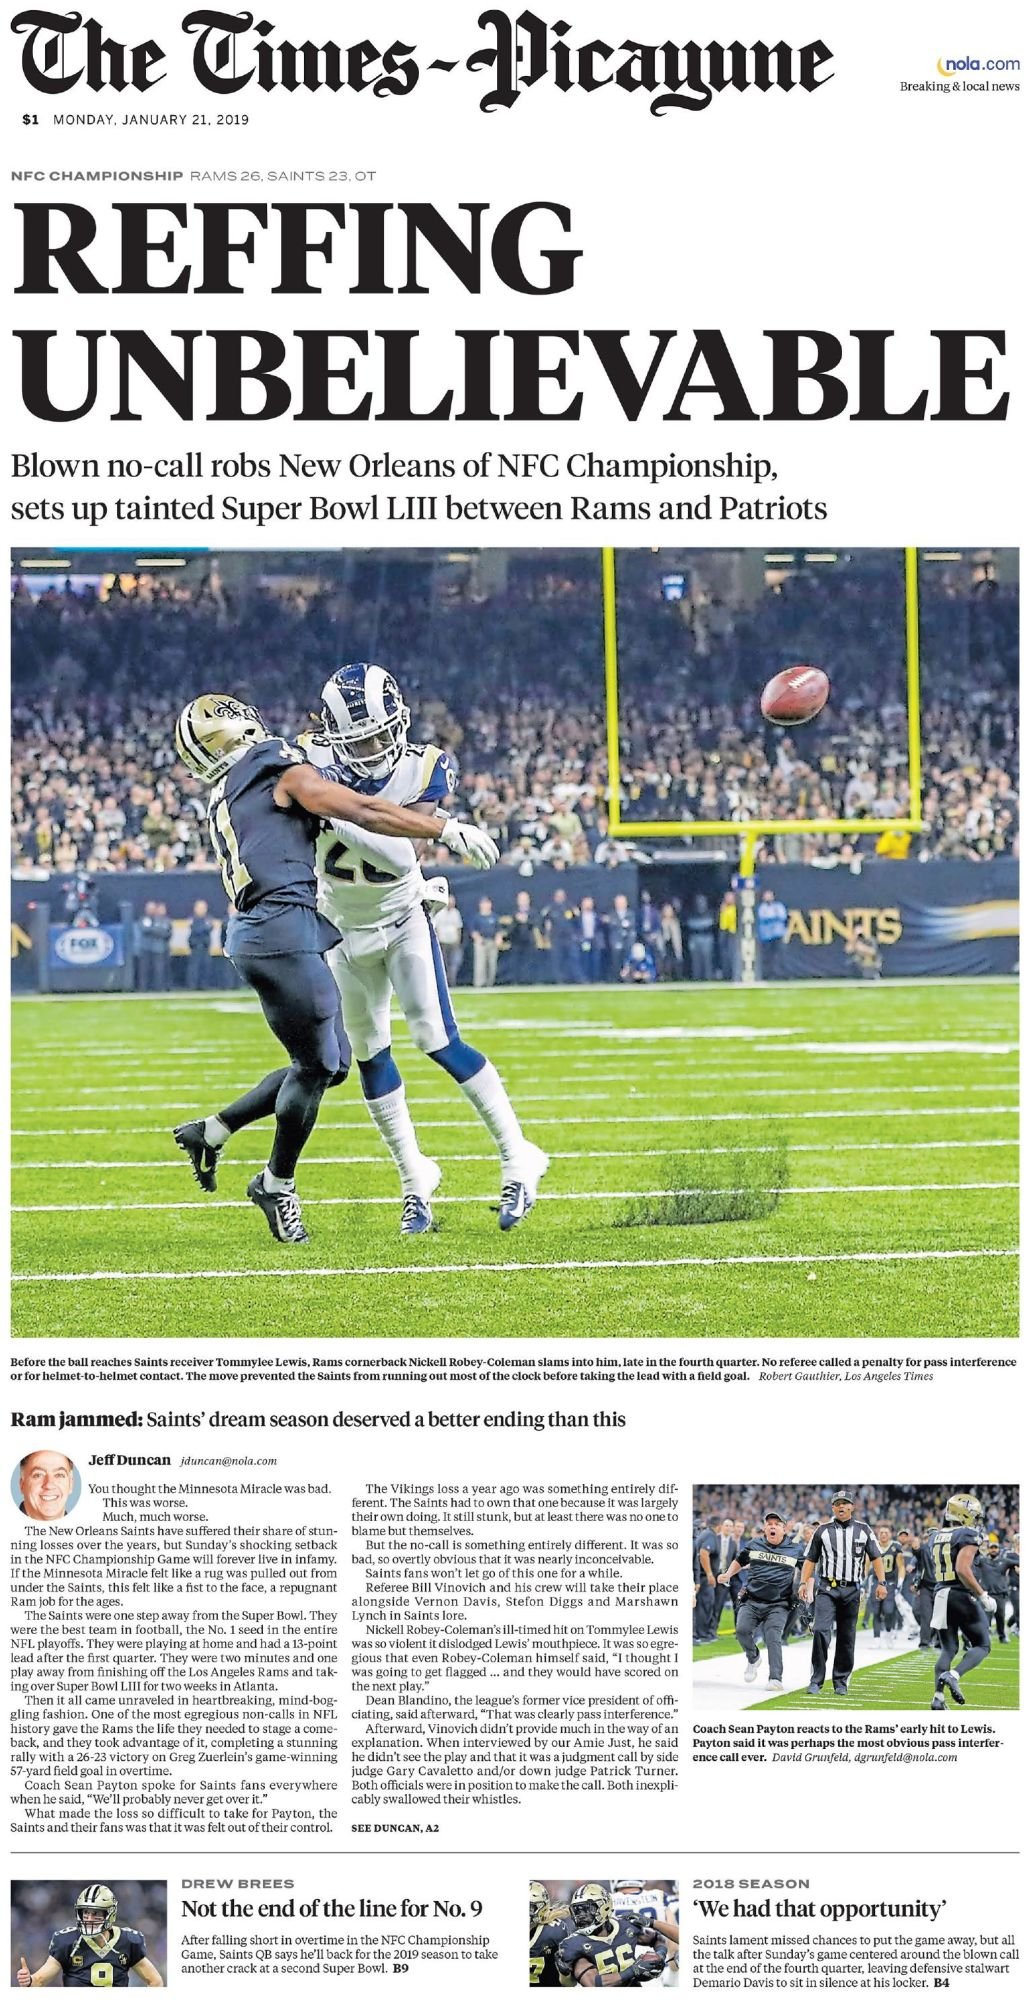 16 times picayune front pages 2019.pdf